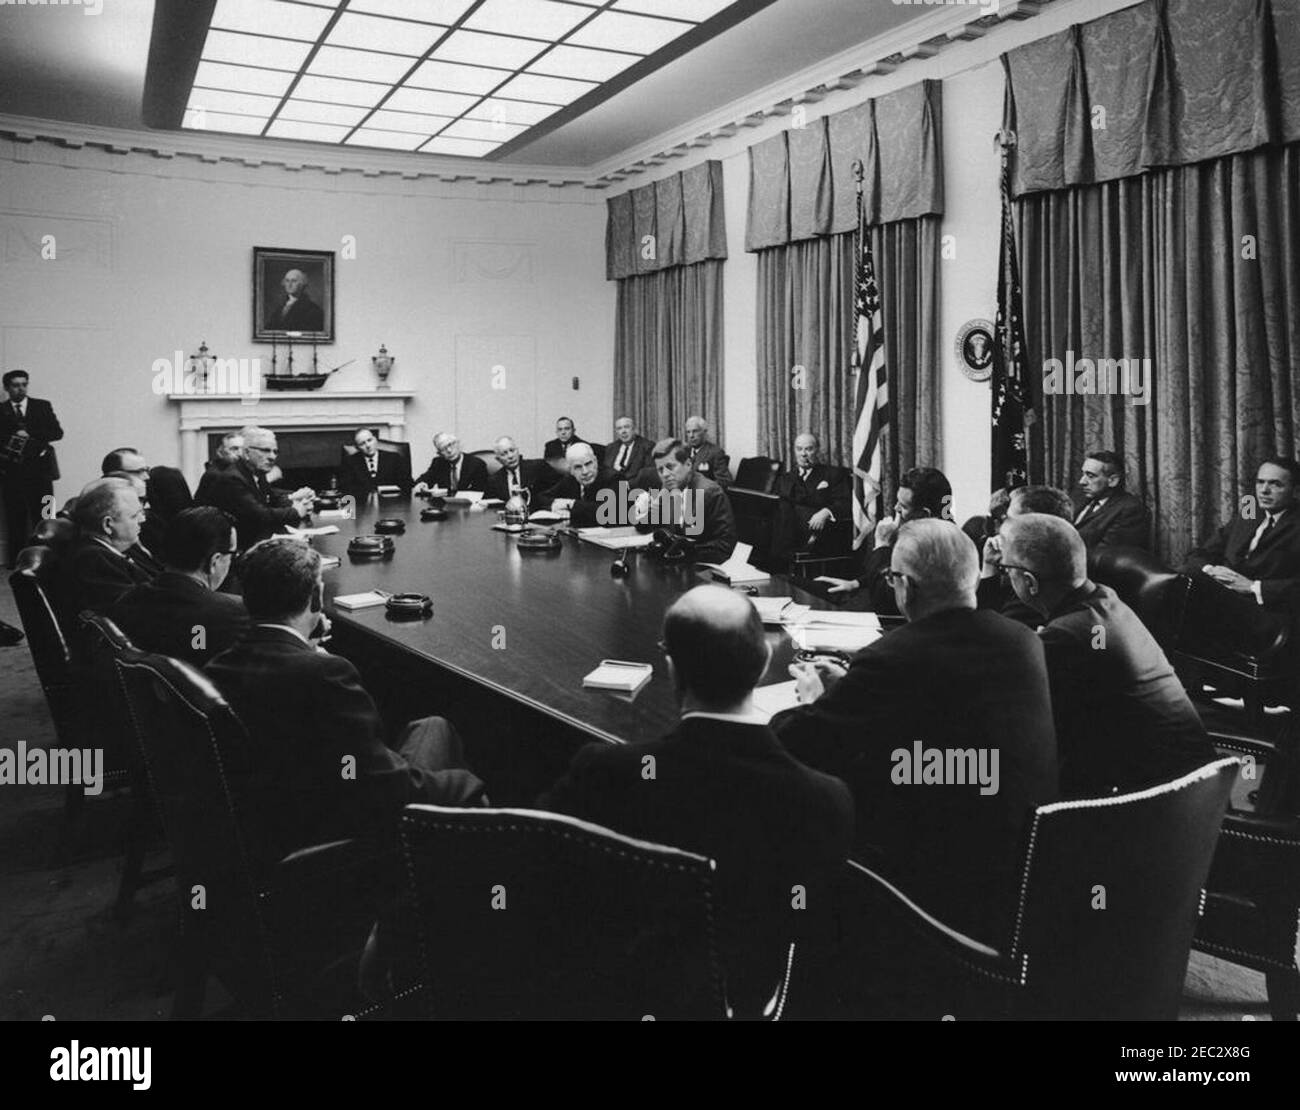 Visit of members of the National Export Expansion Council in the Cabinet Room, 12:10PM. President John F. Kennedy (center, seated at right side of table) talks with members of the National Export Expansion Council in the Cabinet Room of the White House, Washington, D.C. Secretary of Commerce Luther H. Hodges sits left of President Kennedy; Roger P. Sonnabend, Executive Vice President of Hotel Corporation of America (three seats left of Secretary Hodges), sits at the head of the table; all others are unidentified. [Please see the Presidentu2019s schedule for a complete list of attendees.] Stock Photo